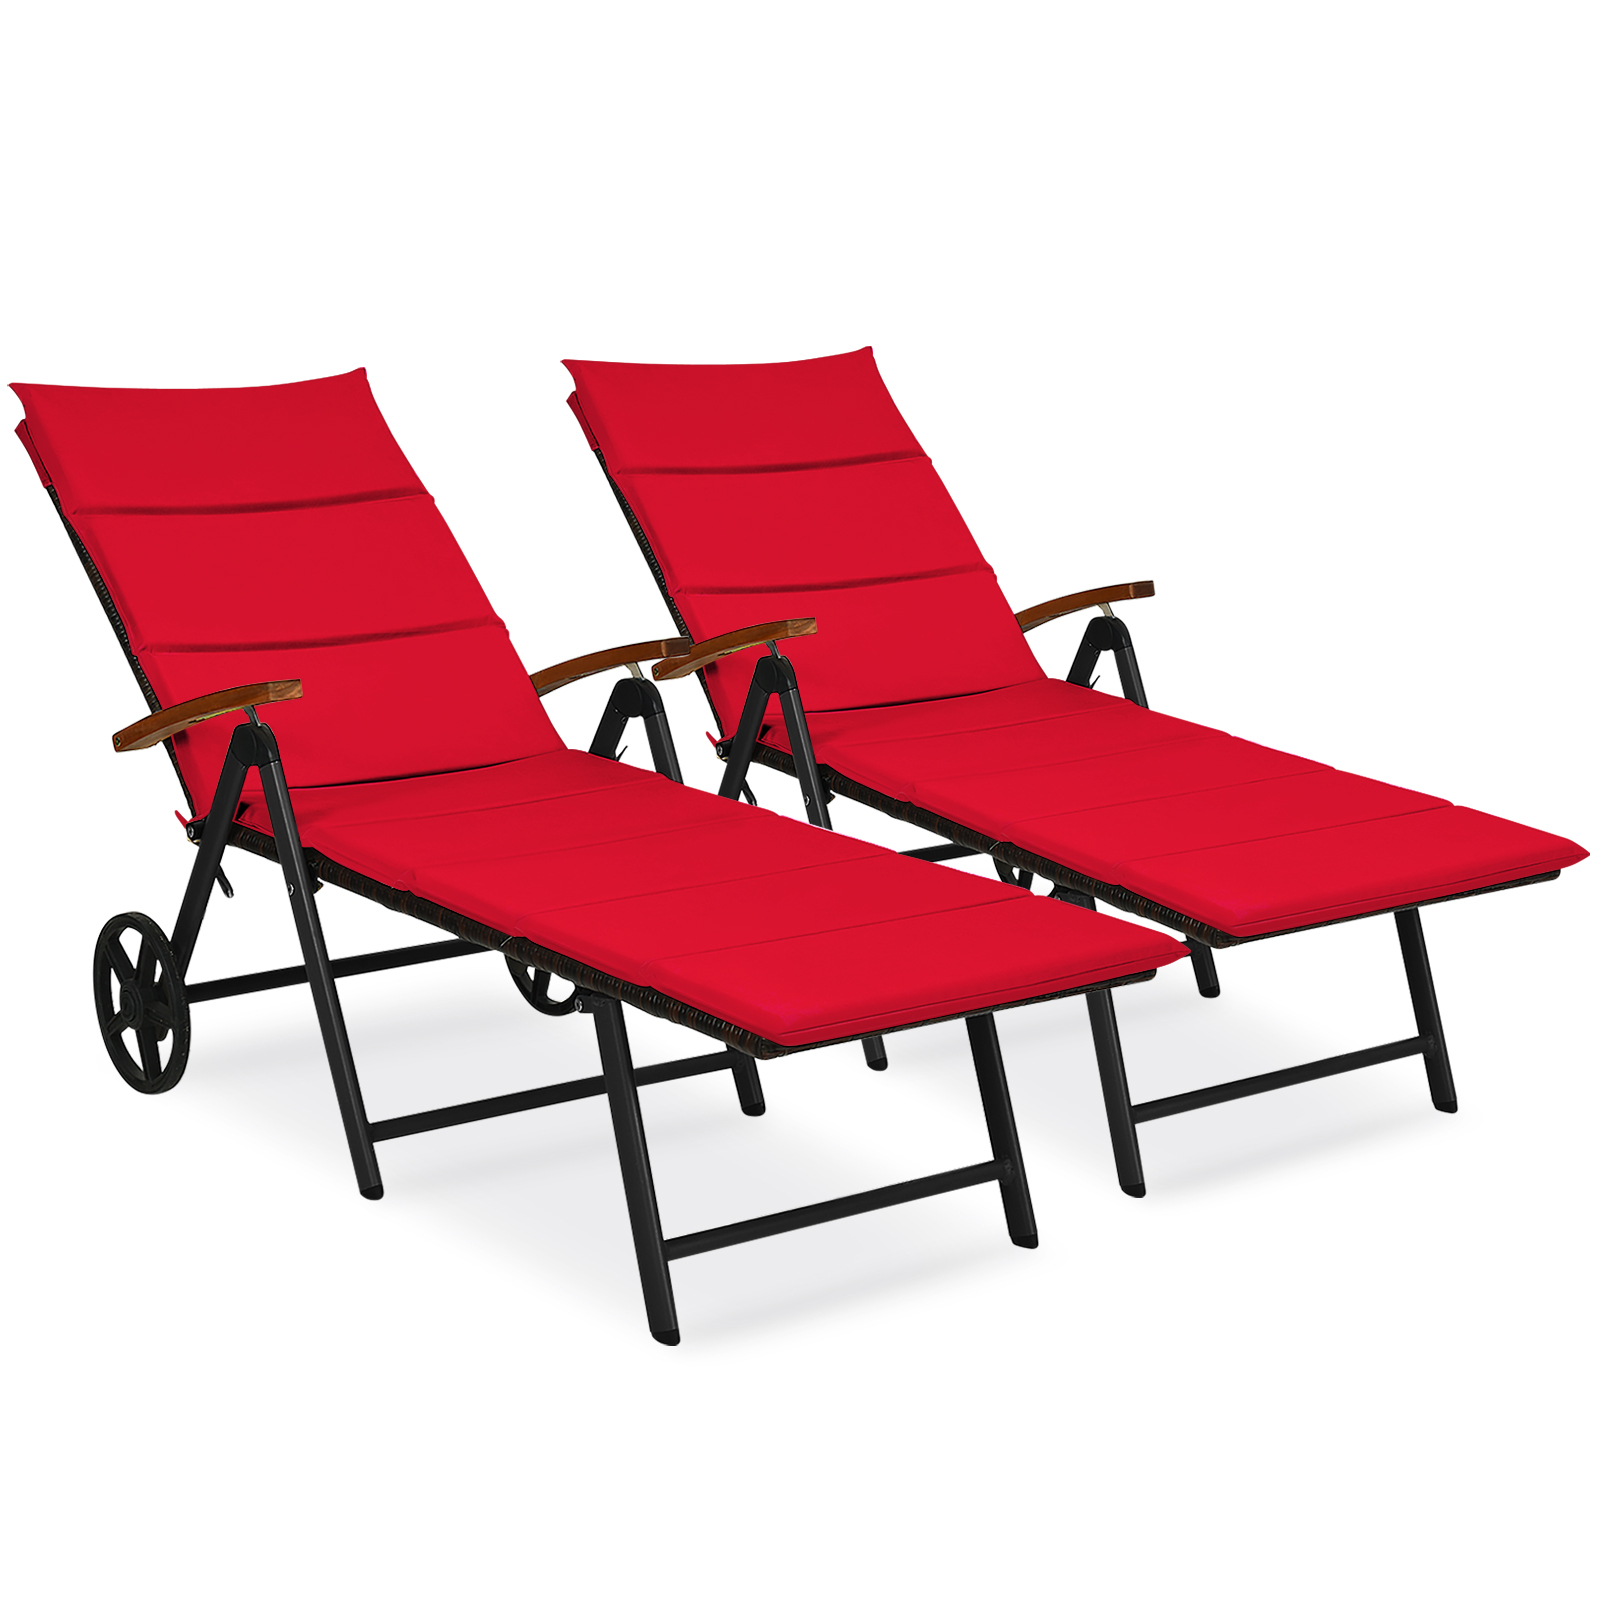 Patiojoy 2PCS Foldable Beach Sling Chair with 7 Adjustable Positions&Cushion Indoor Living Room Chaise Lounge Red - image 1 of 8